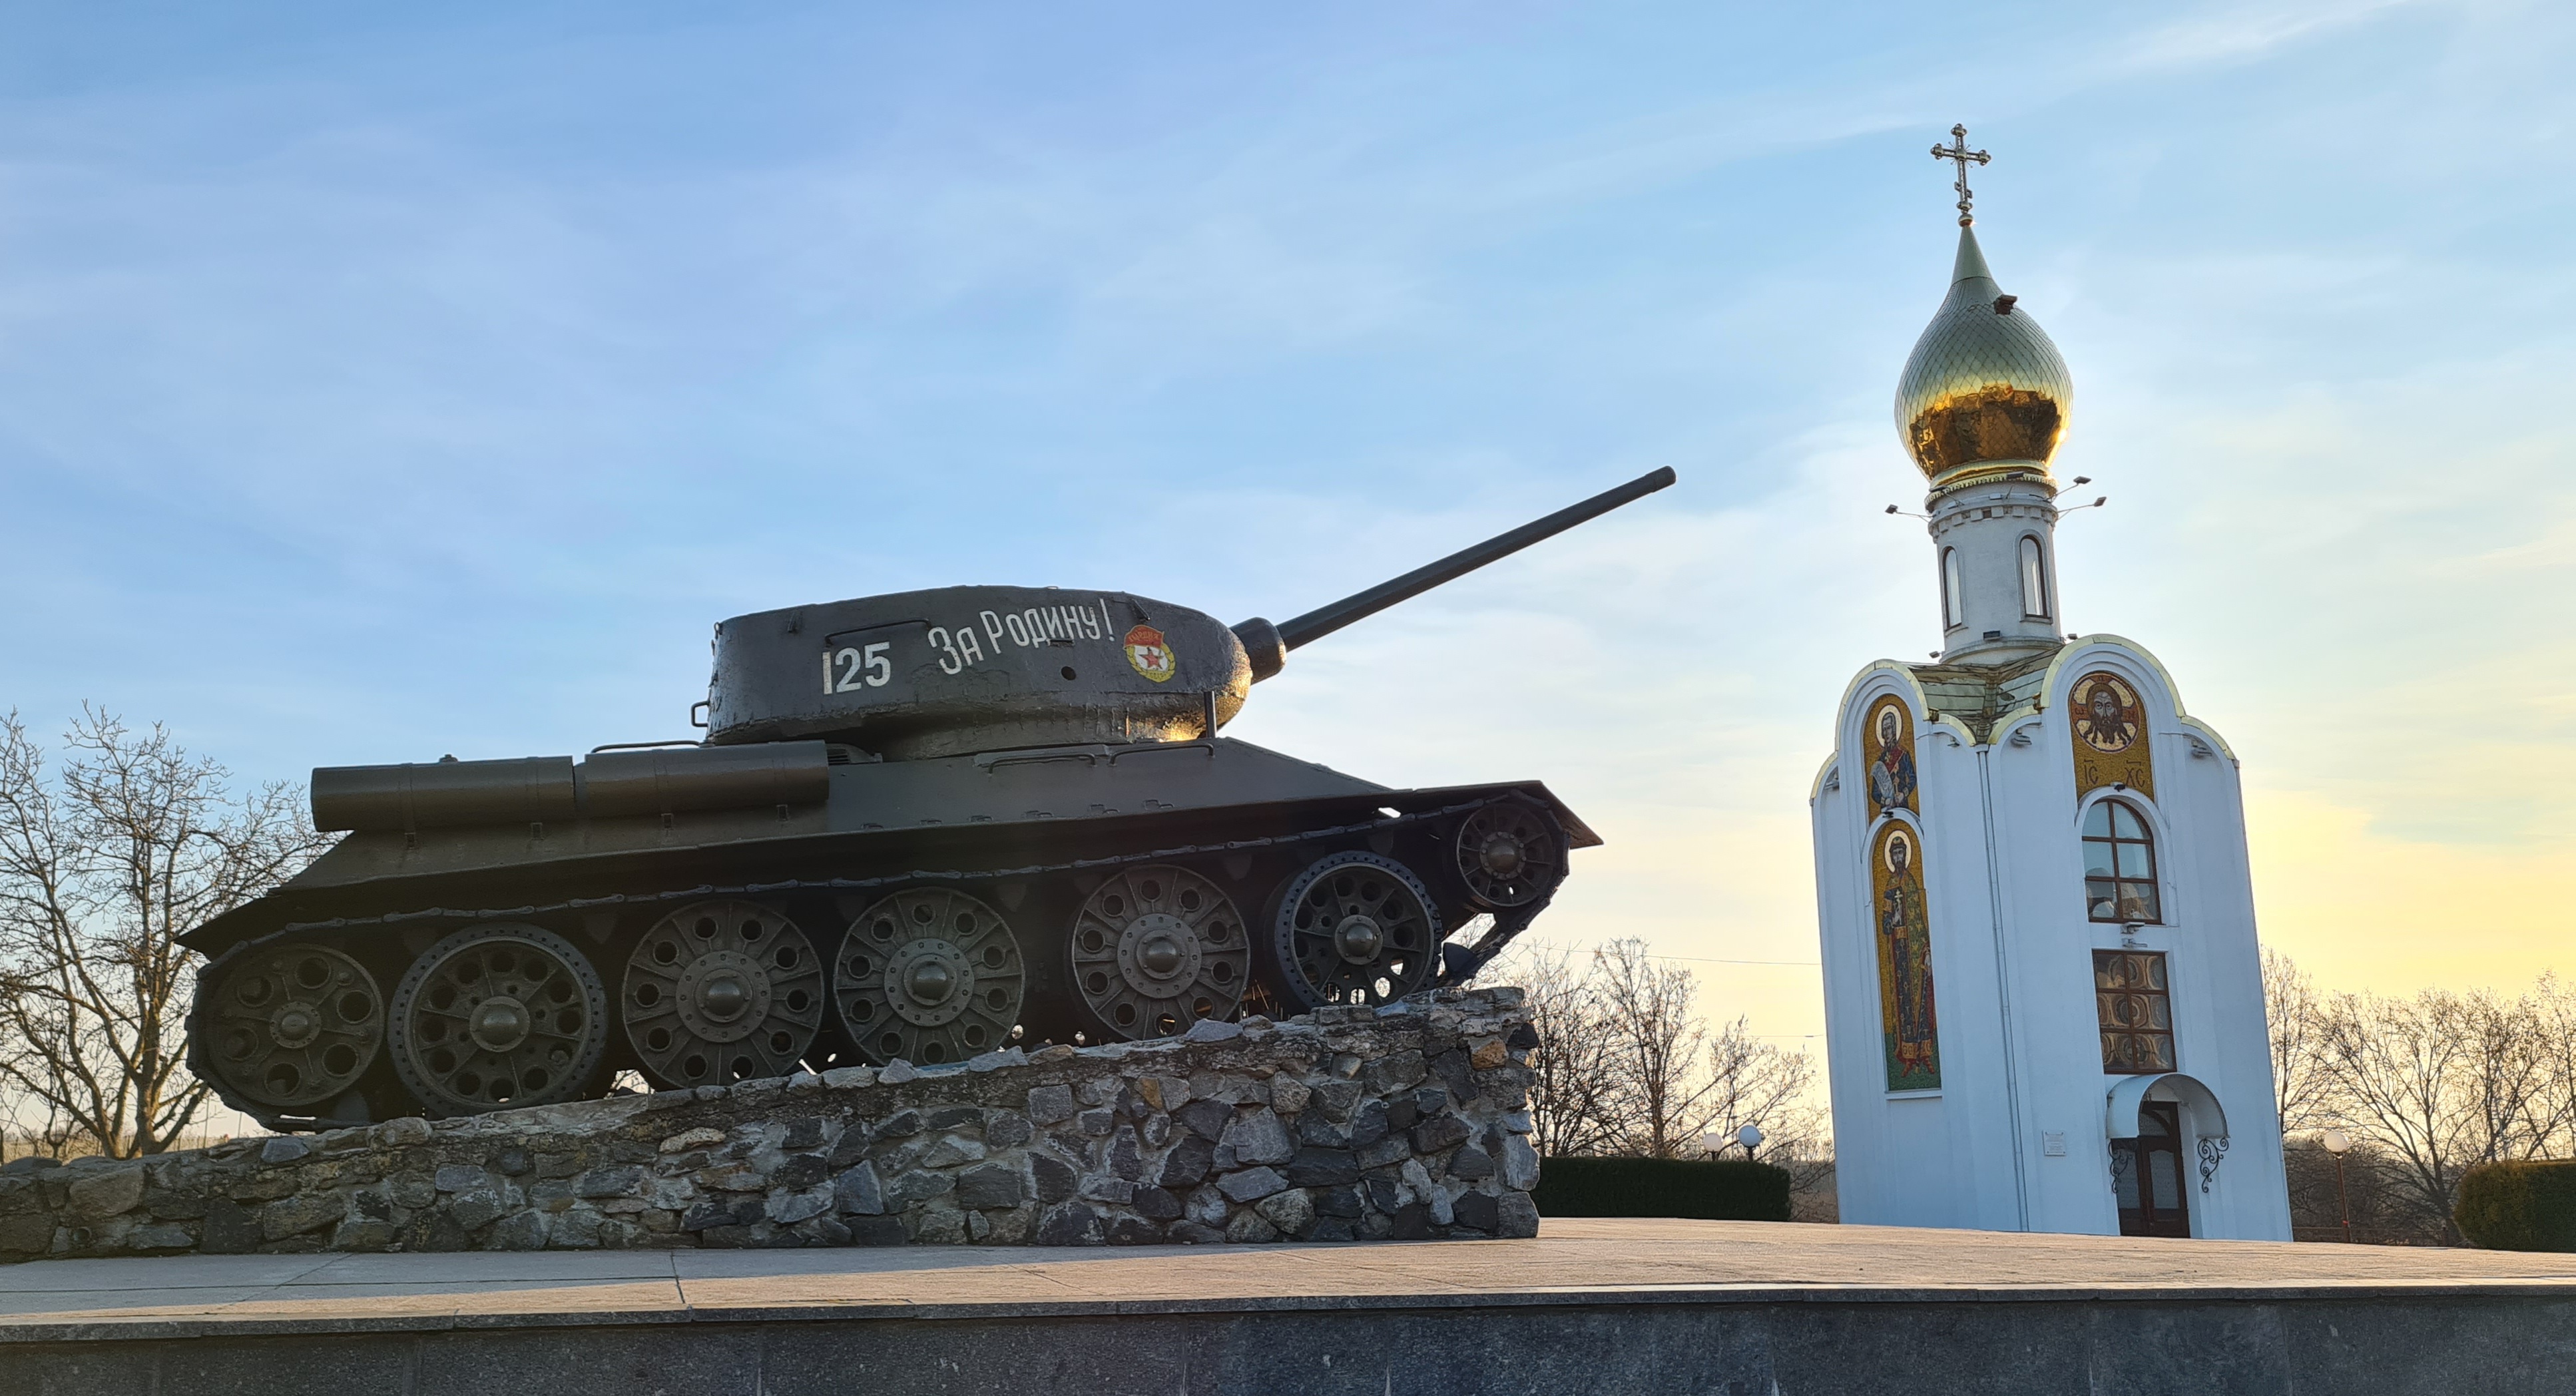 Discover Trasnistria. Tank Monument and St. George the Victorious Chapel at Memorial of Glory located on Suvorov Square of Tiraspol, the capital of Transnistria.